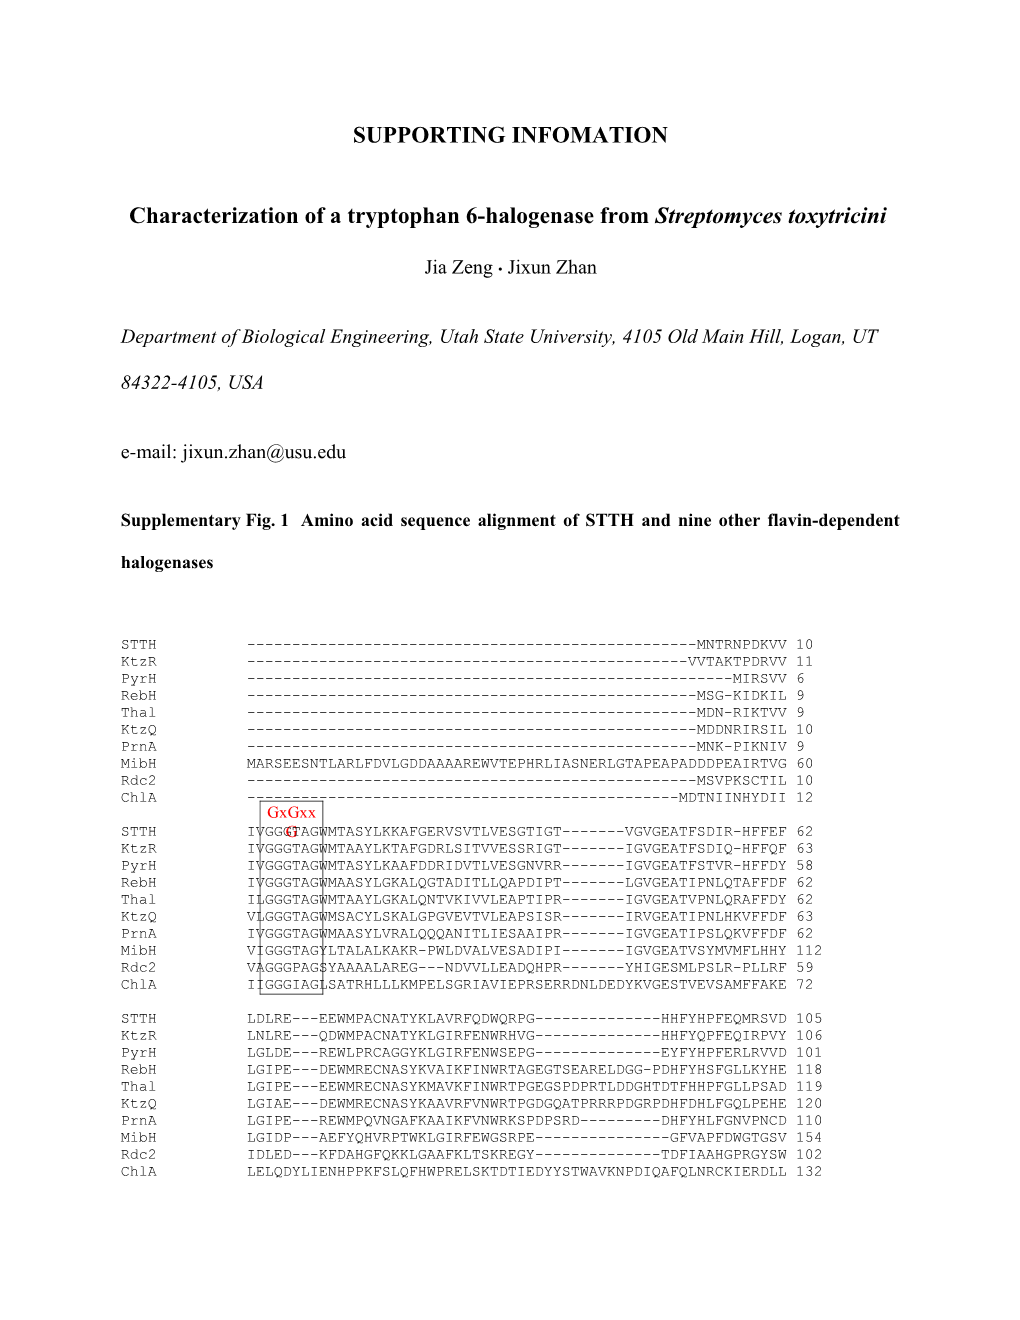 Characterization of a Tryptophan 6-Halogenase from Streptomyces Toxytricini